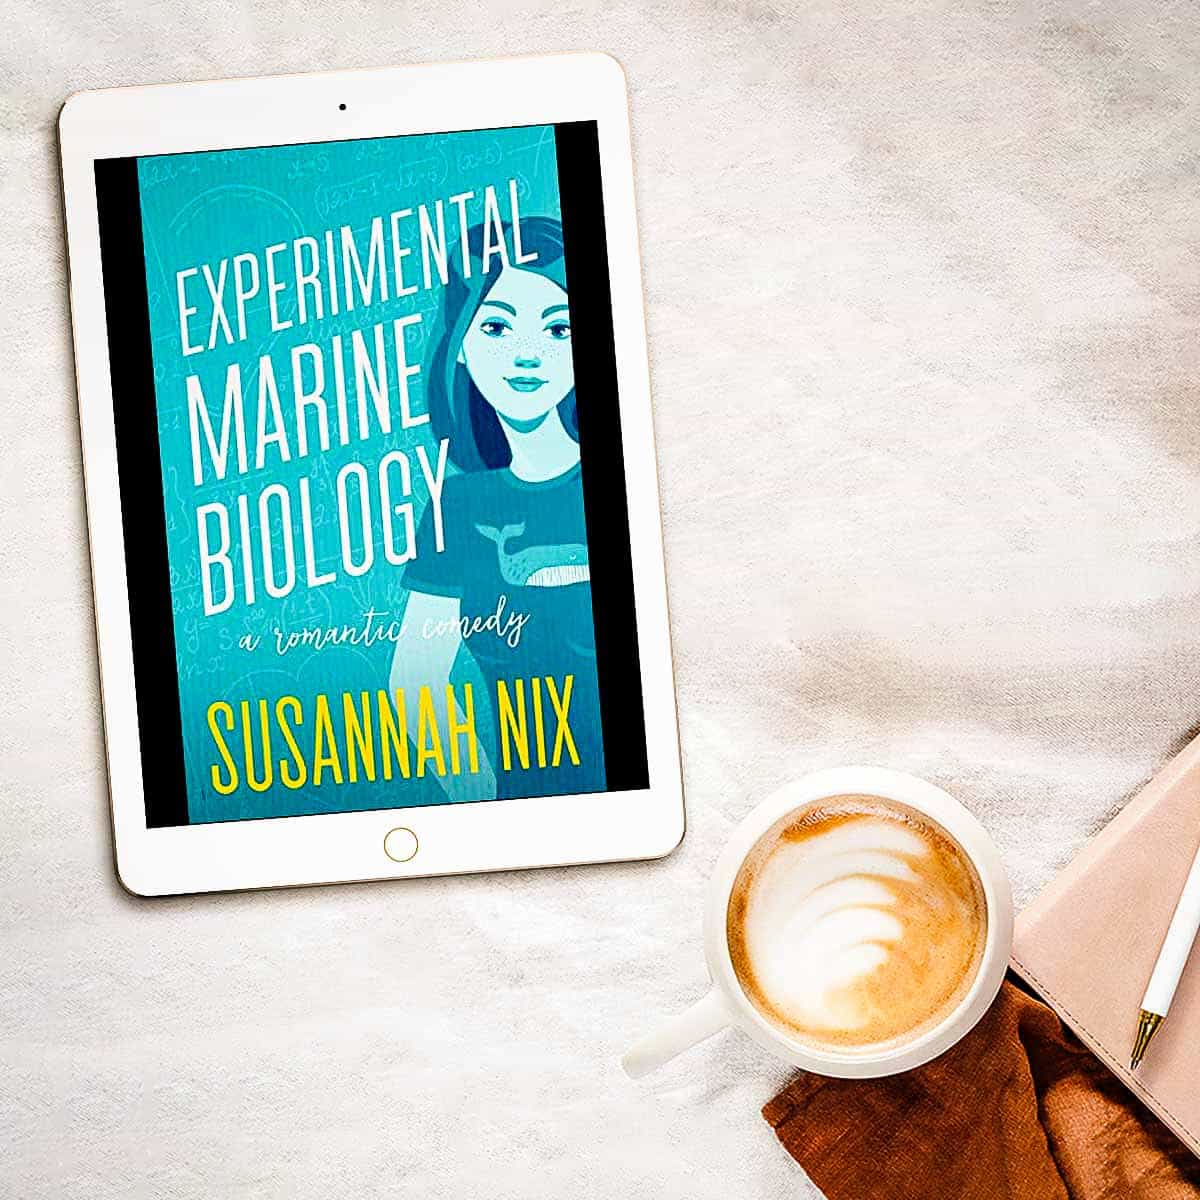 Whale puns and hot models collide in Experimental Marine Biology by Susannah Nix, a smartly-written, sweetly charming opposites attract friends-to-lovers story!